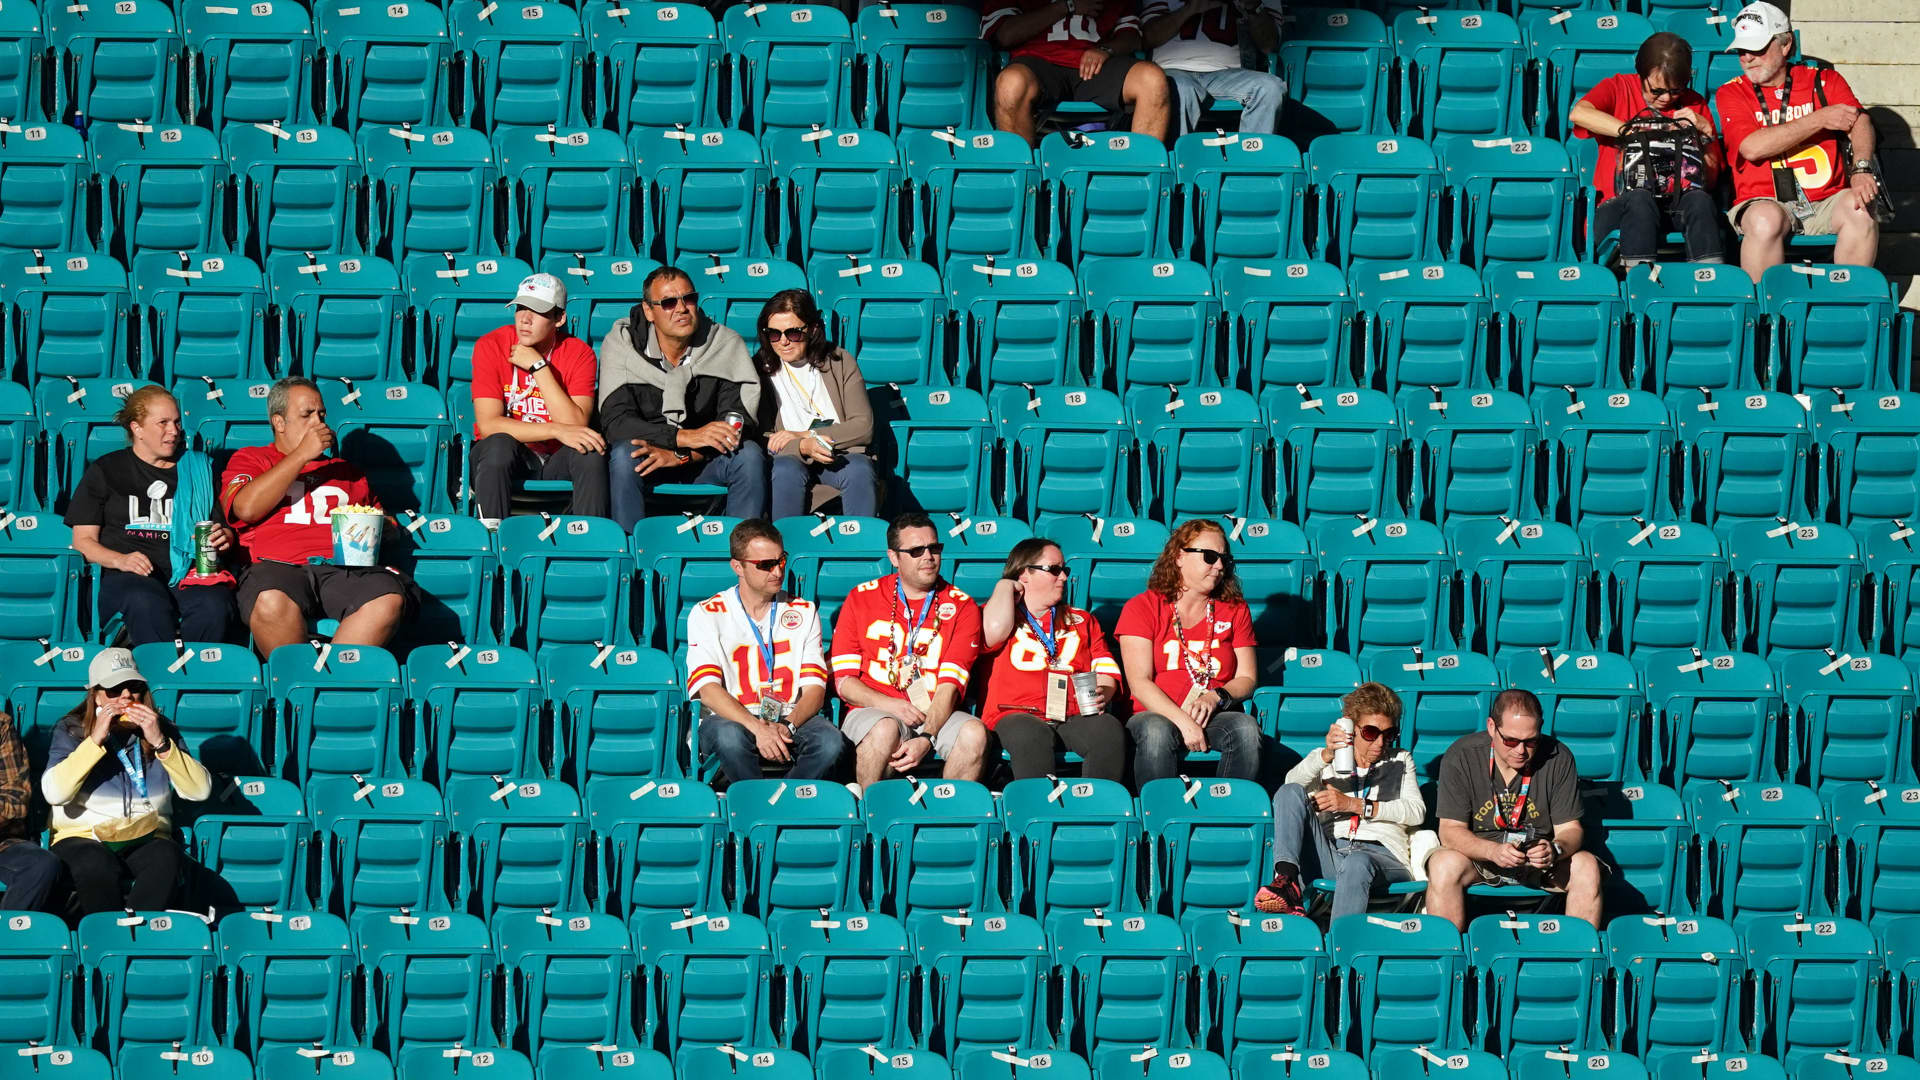 San Francisco 49ers and Kansas City Chiefs fans look on in game action during the Super Bowl LIV game between the Kansas City Chiefs and the San Francisco 49ers on February 2, 2020 at Hard Rock Stadium, in Miami Gardens, FL.